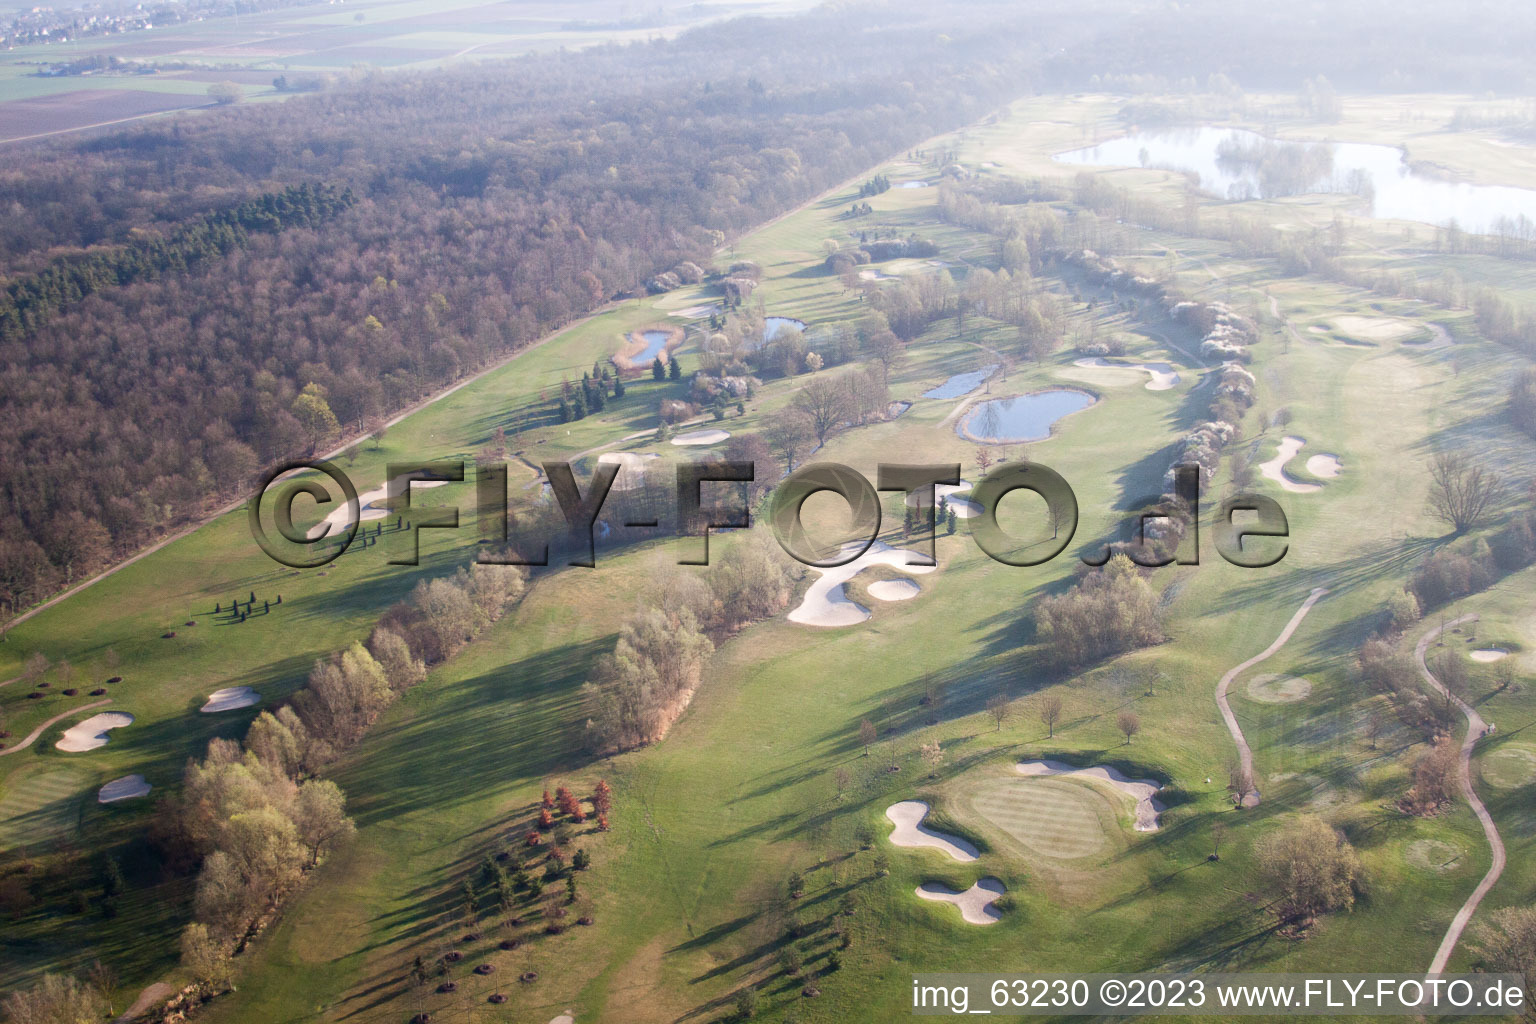 Dreihof Golf Club in Essingen in the state Rhineland-Palatinate, Germany from the drone perspective